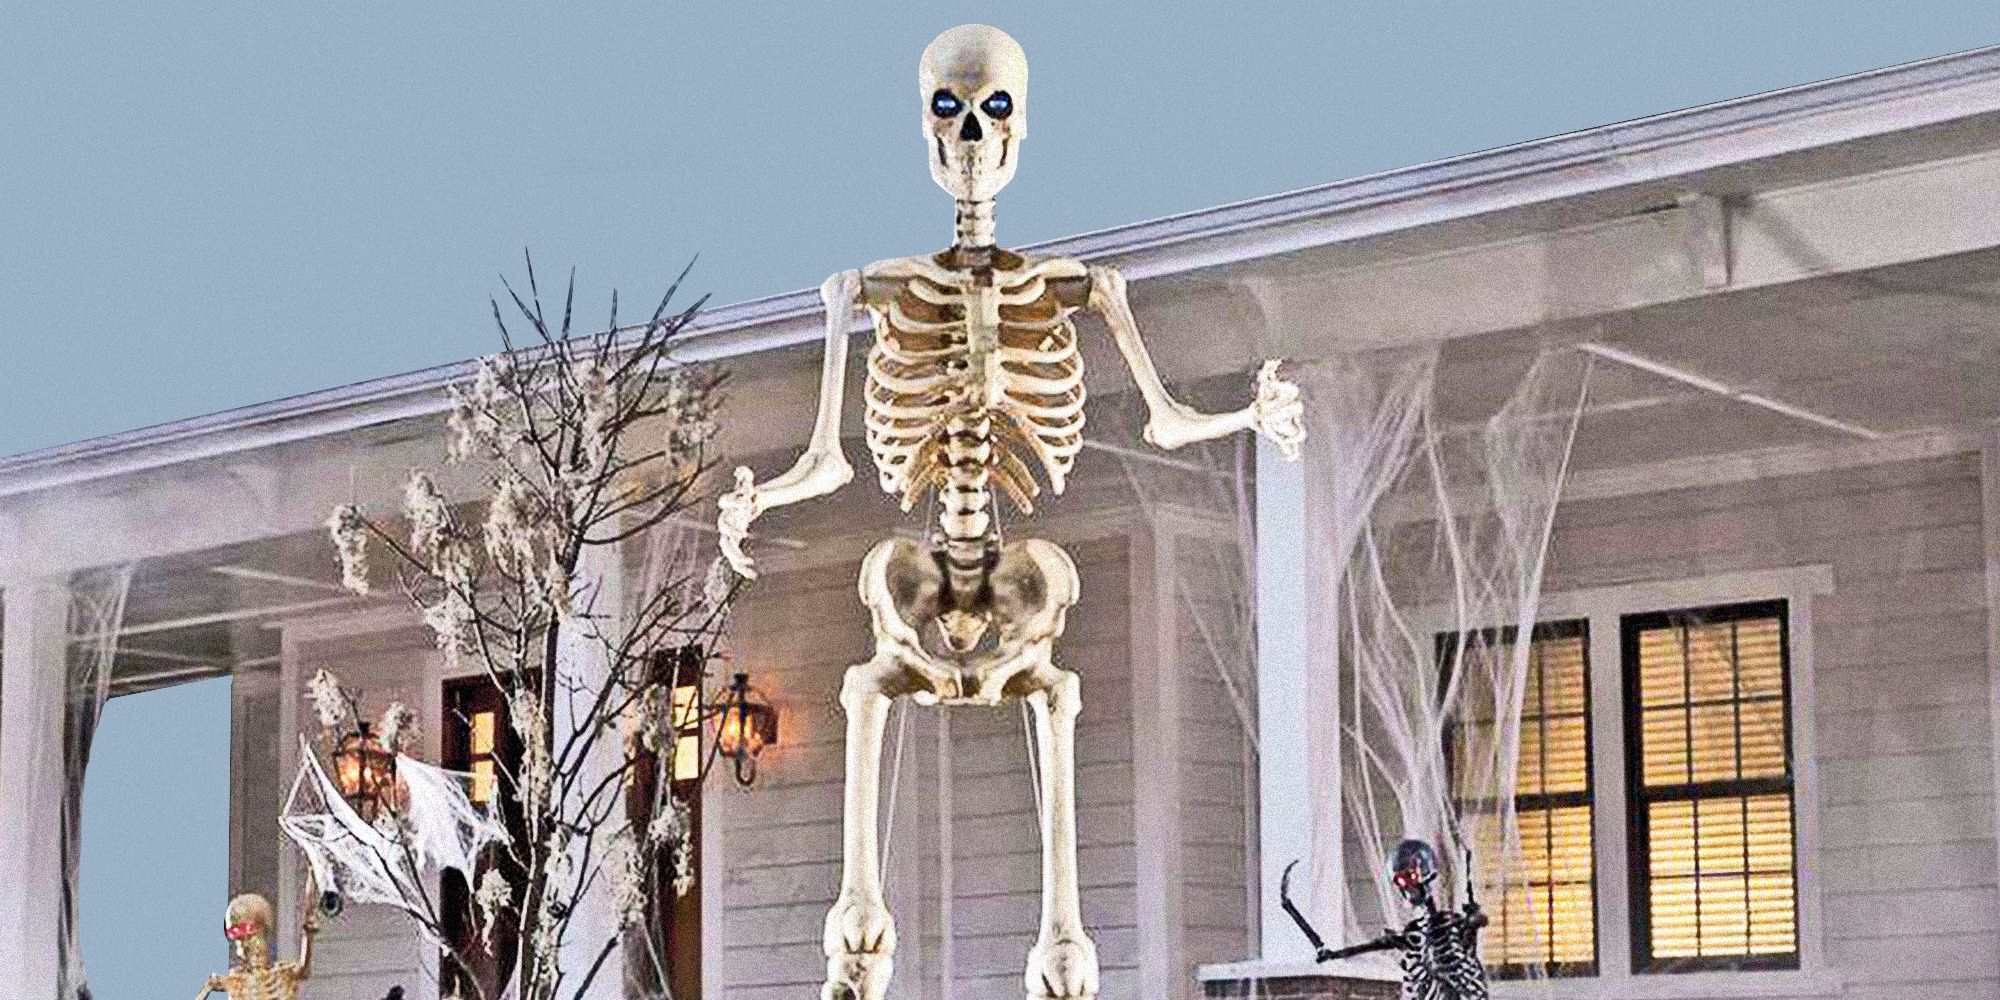 How 12 Foot Skeleton from Home Depot Went Viral for Halloween 2020